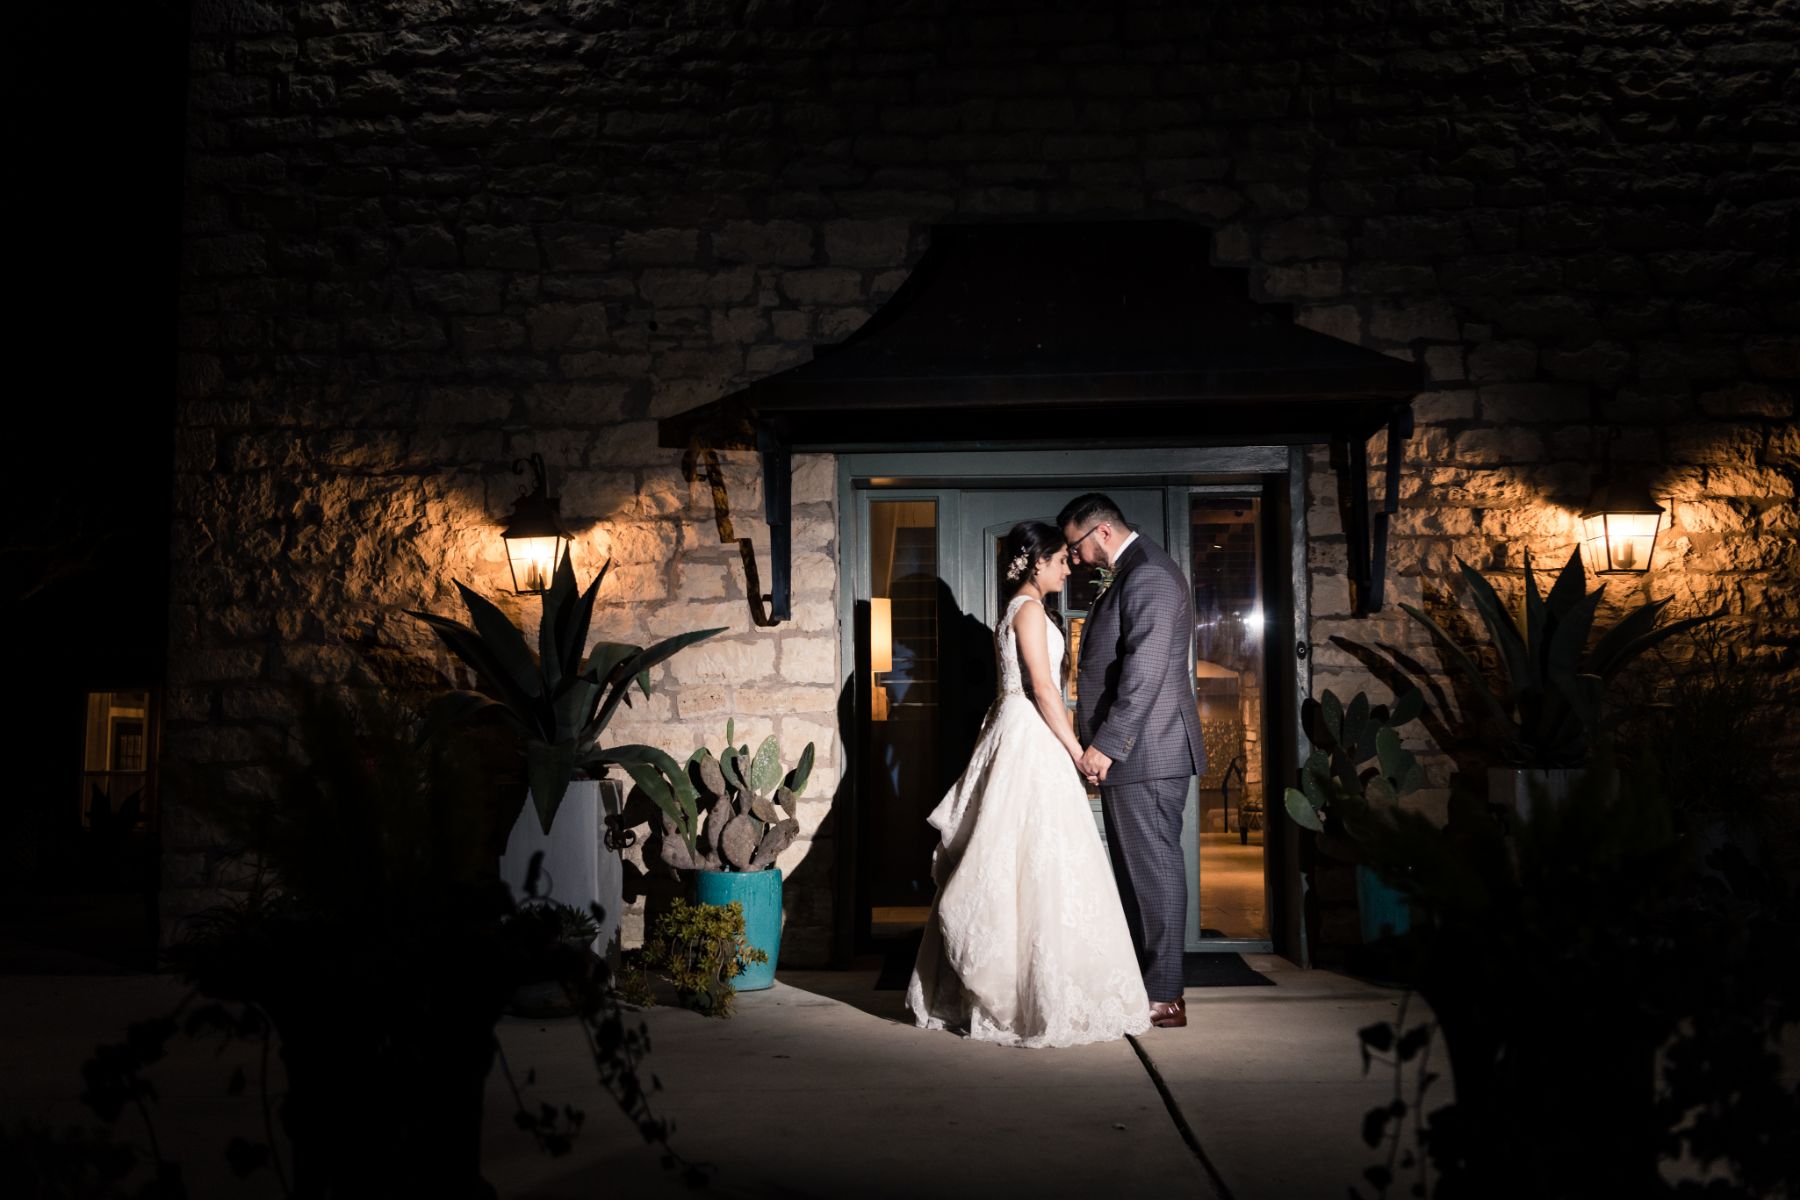 Bride and groom are holding hands with their foreheads touching, two lanterns are lit on each side with a limestone building behind them.